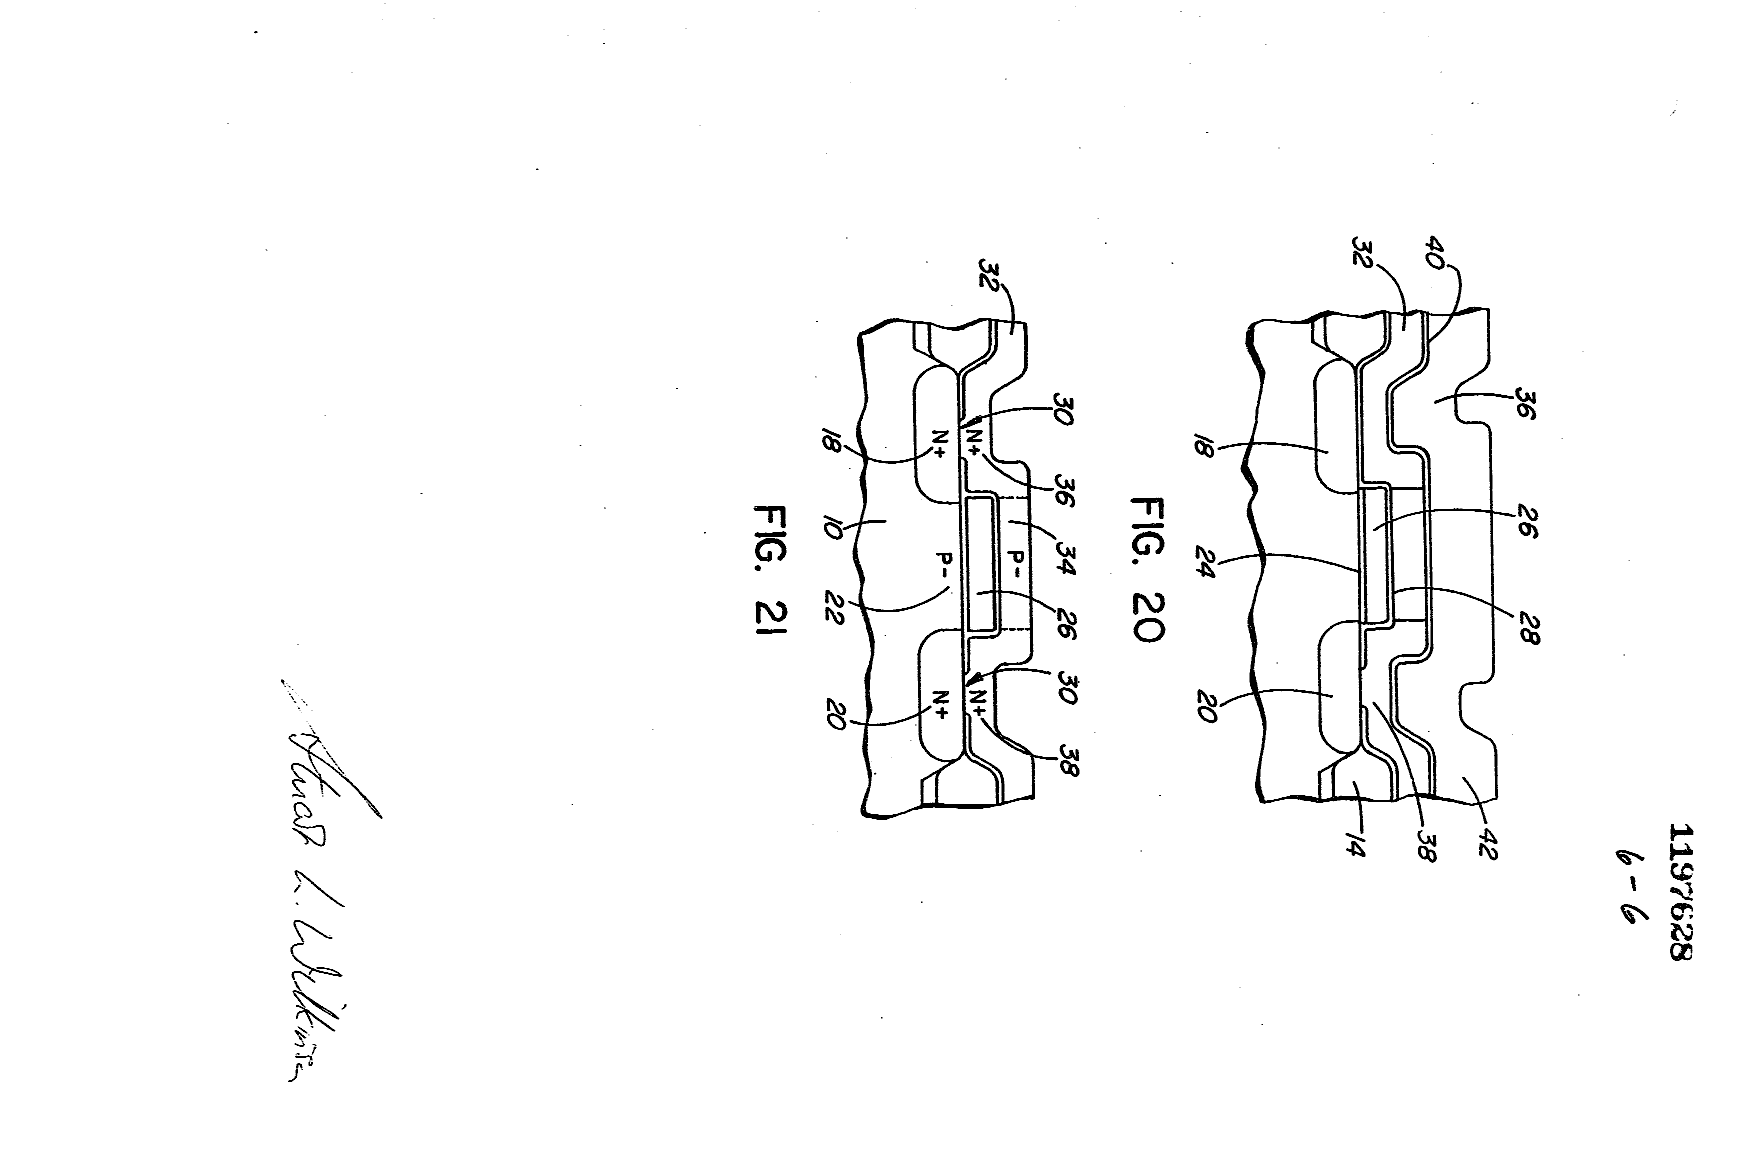 Canadian Patent Document 1197628. Drawings 19921222. Image 6 of 6